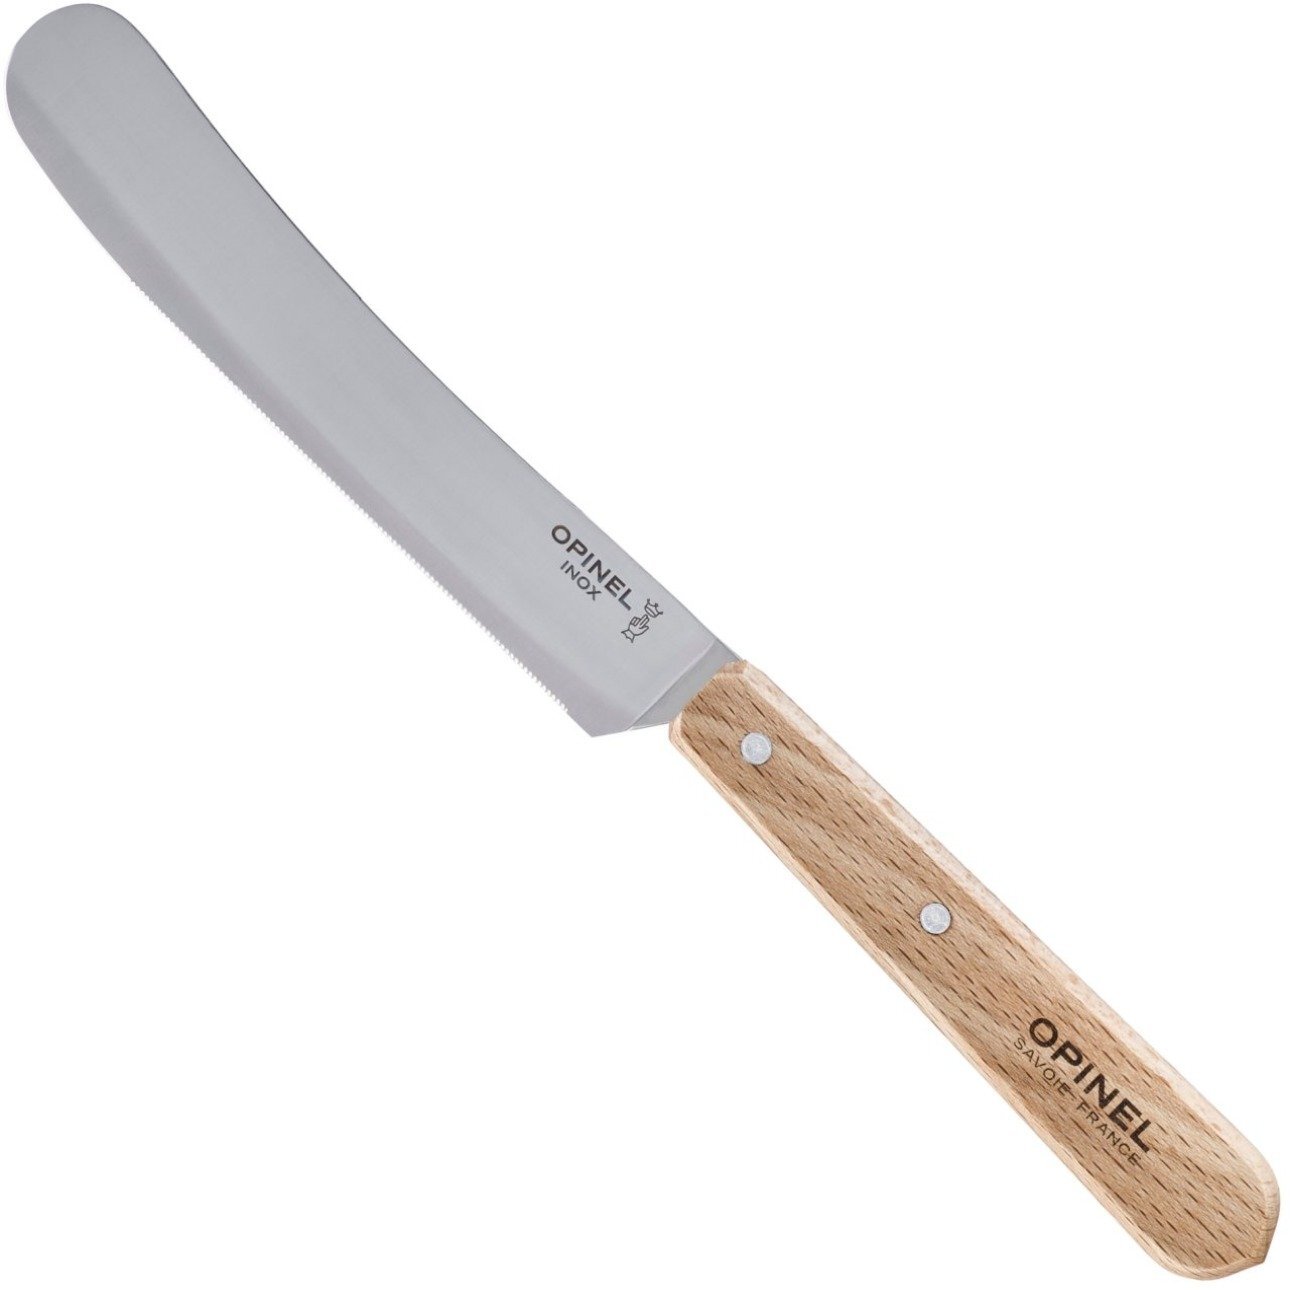 Opinel No.113 Serrated Knife